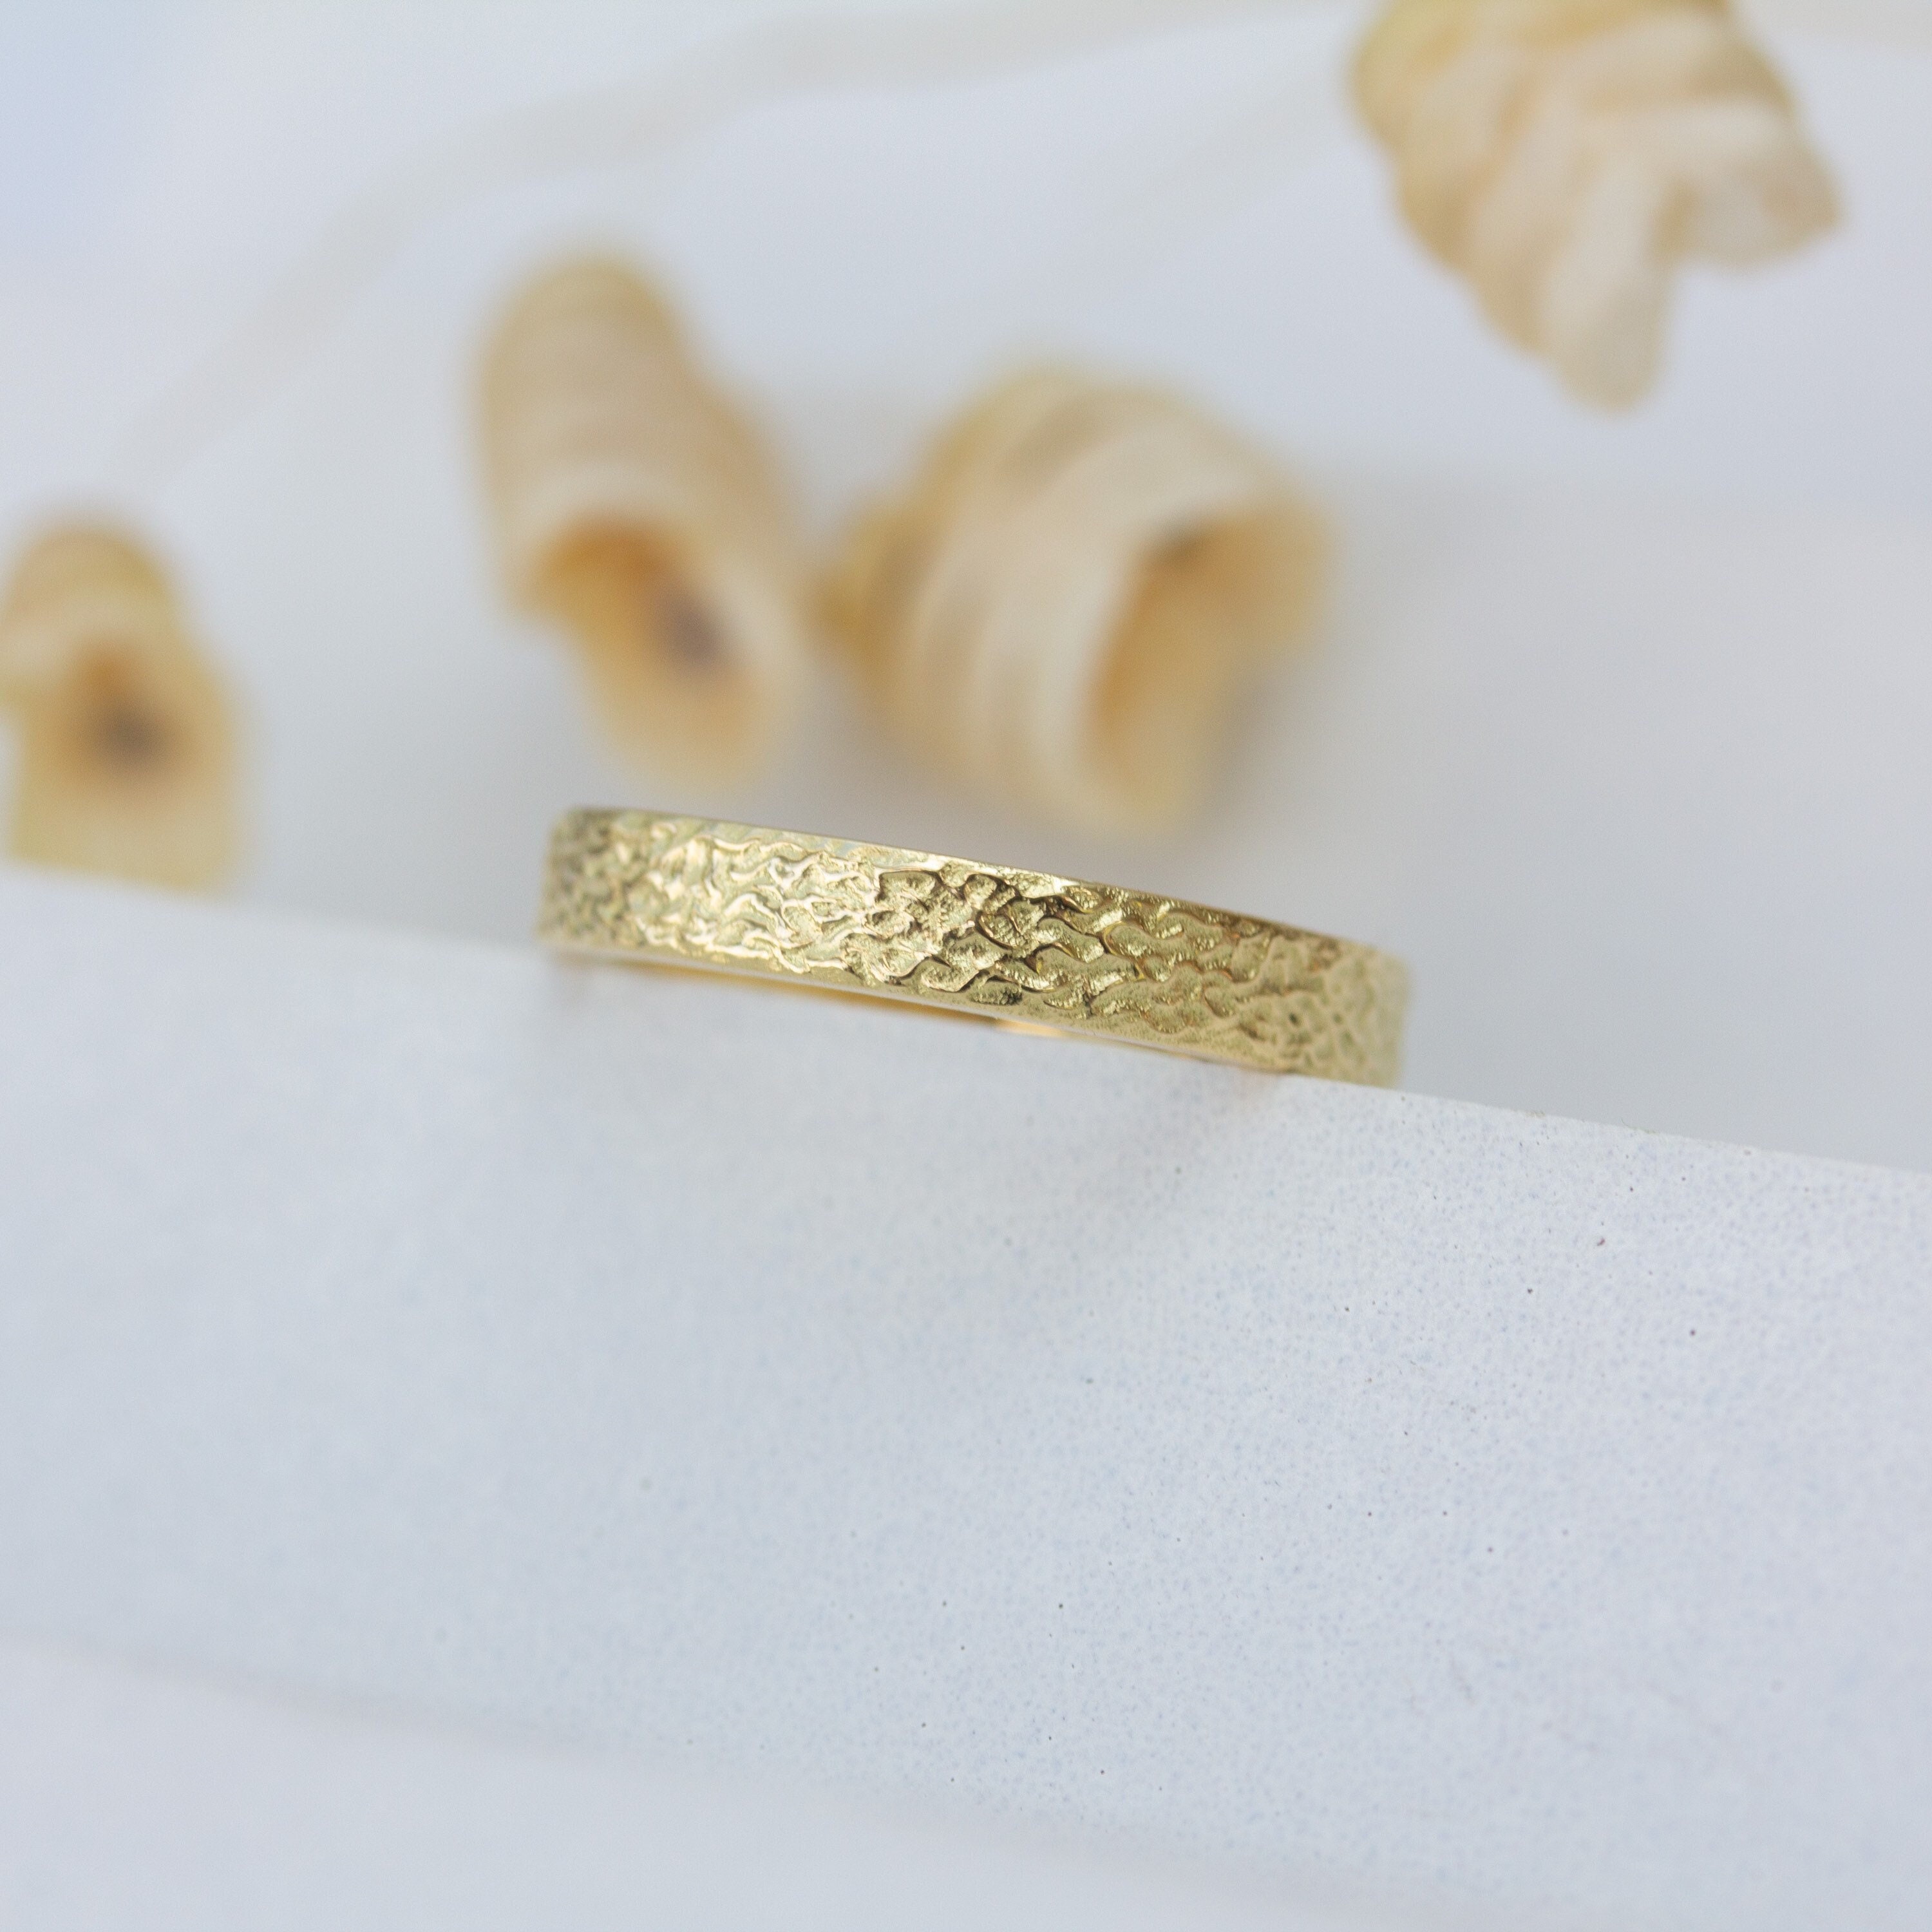 Wave Wedding Band in Solid Gold | Ripple Engagement Ring Textured, Minimalist, Ocean, Sea, Nature Inspired Jewellery Rosalind Elunyd